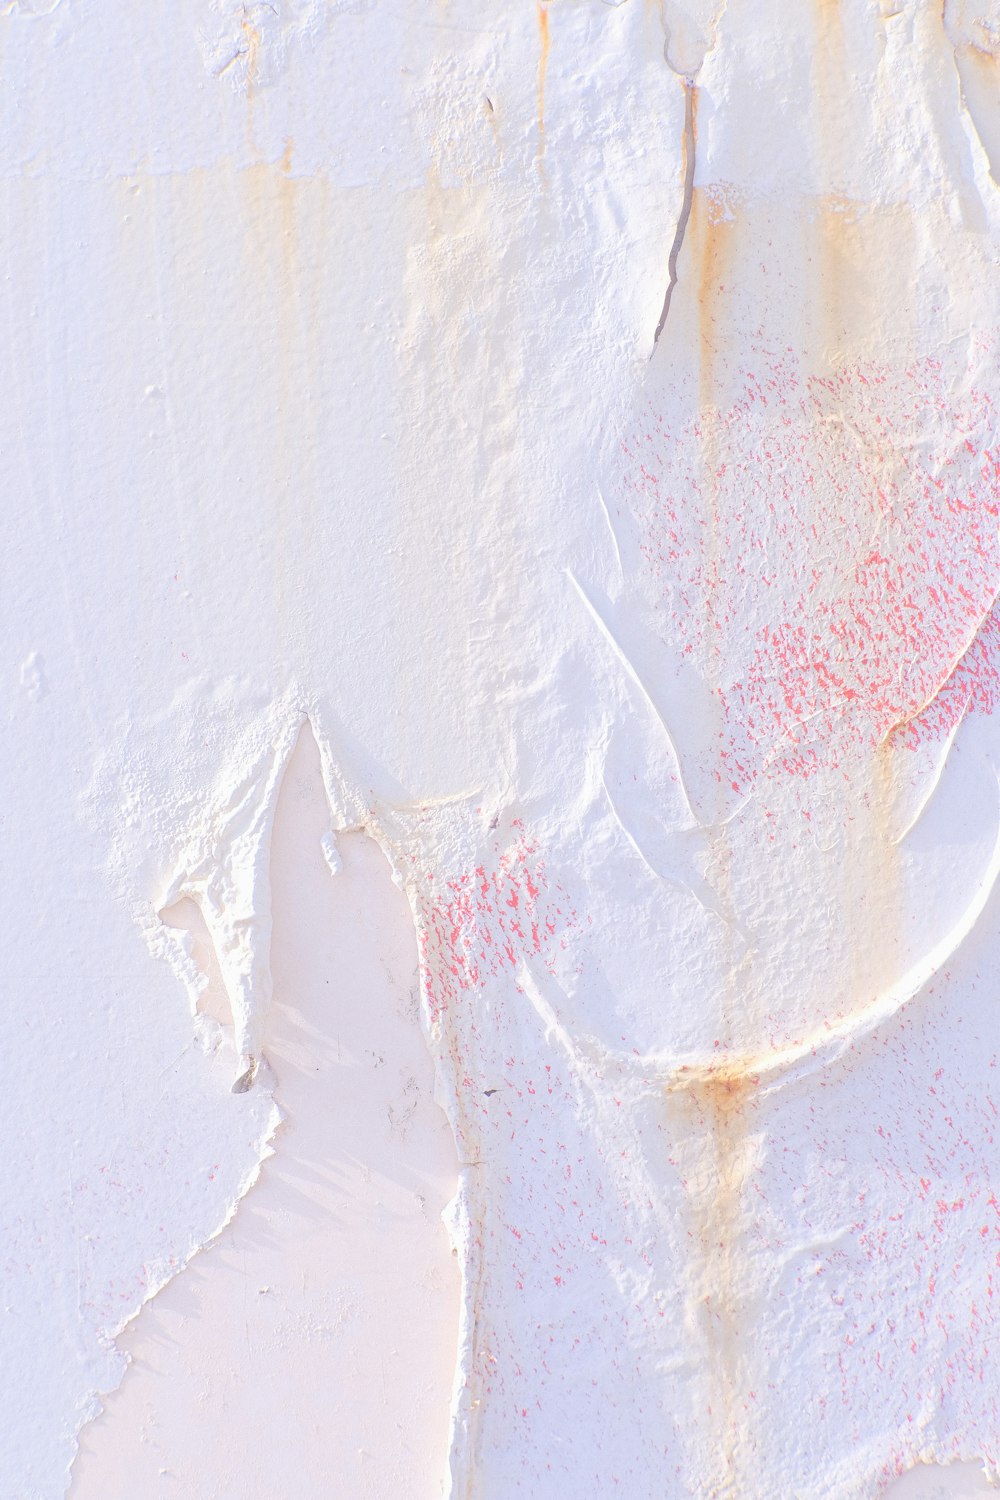 a close up of a white wall with red paint